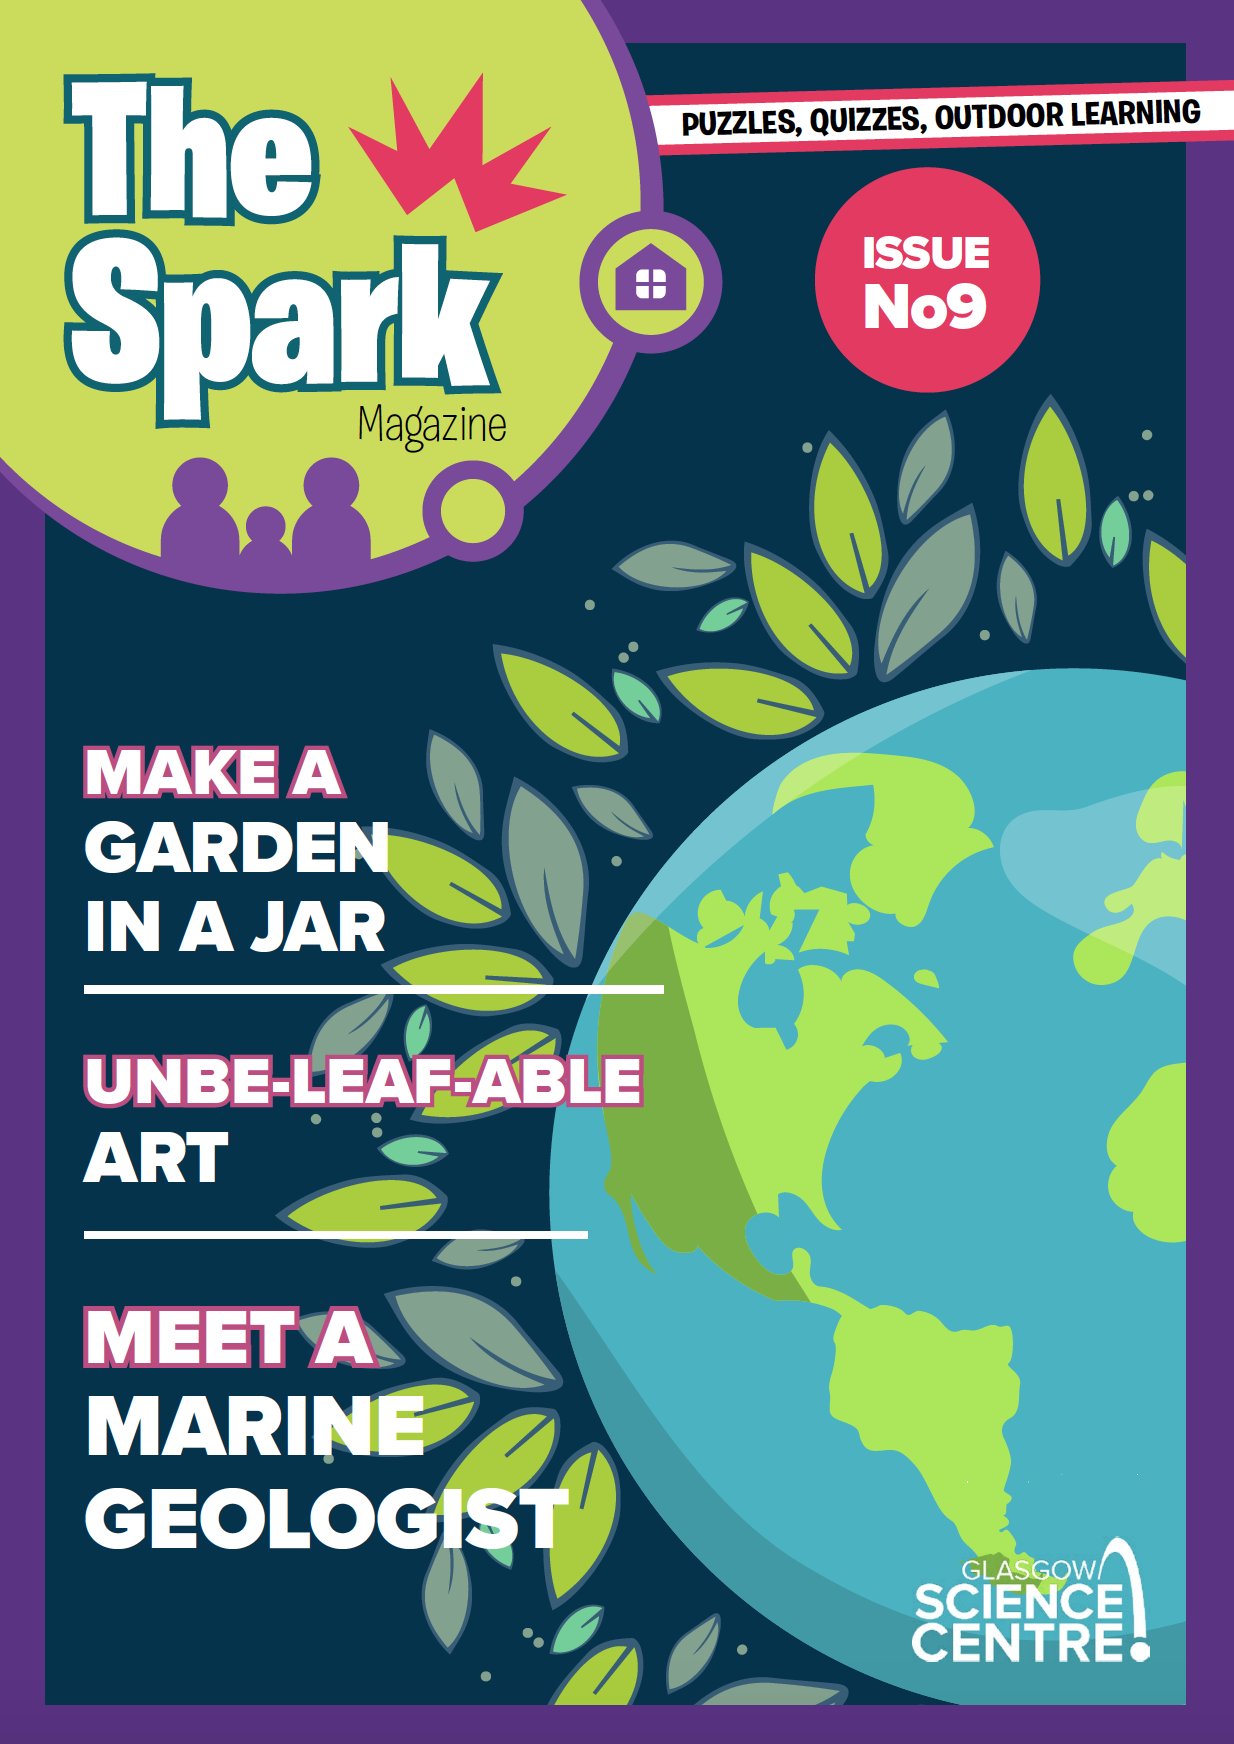 The Spark - Issue 9 with illustrated Earth and wind turbines